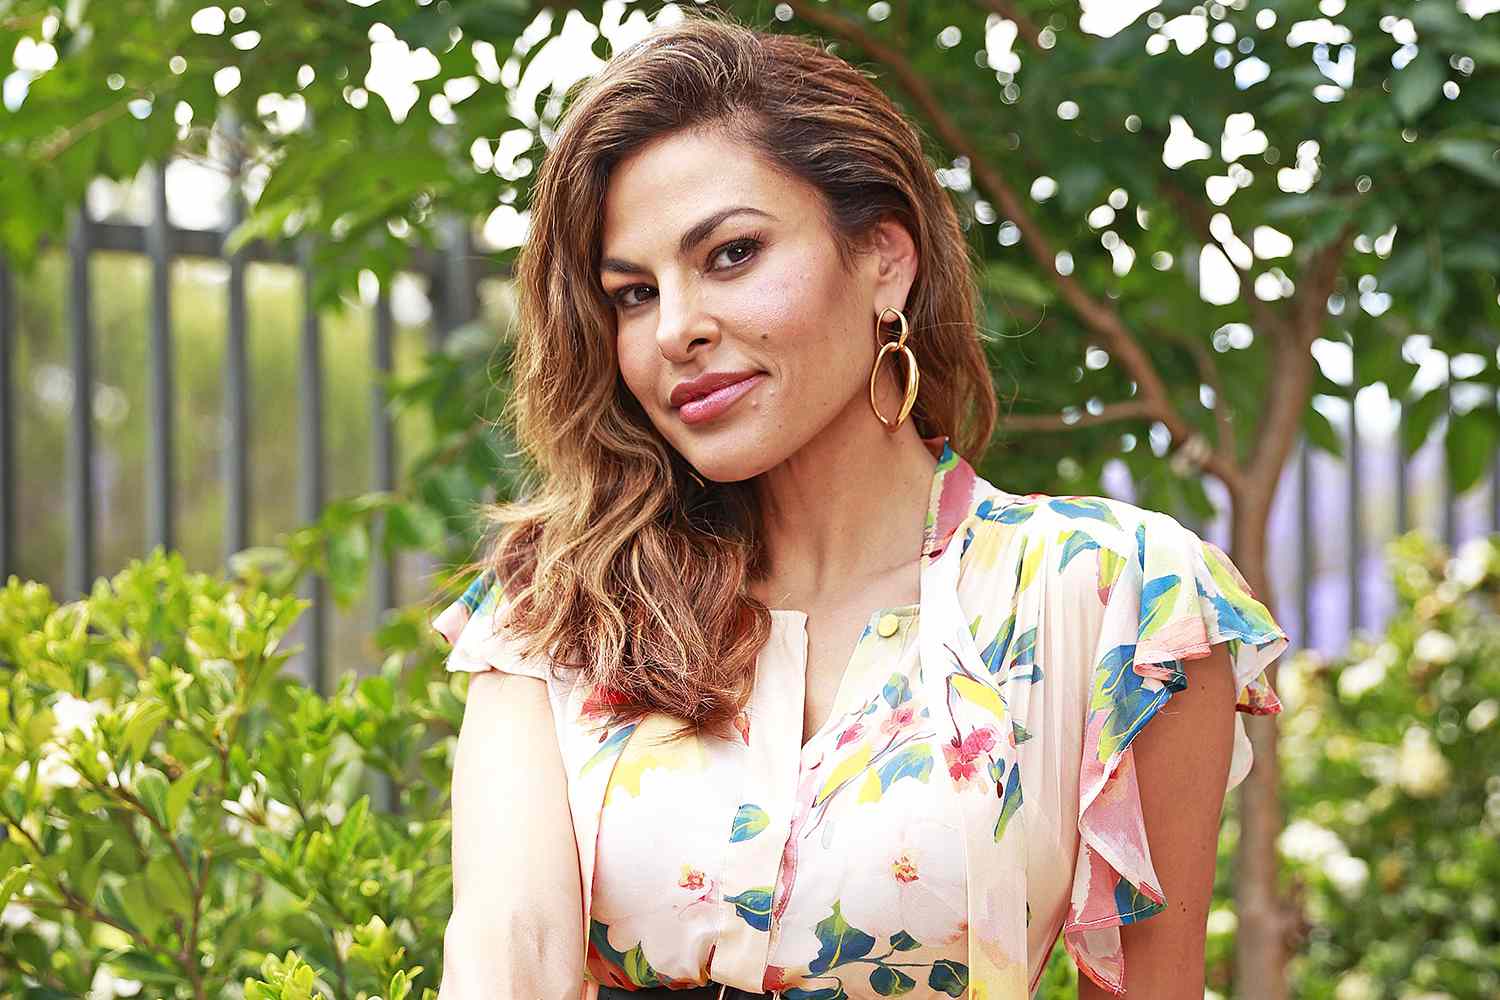 Eva Mendes Opens Up About Her ‘Meditative’ Cleaning Routine at Home: ‘The Family Pitches In’ (Exclusive)